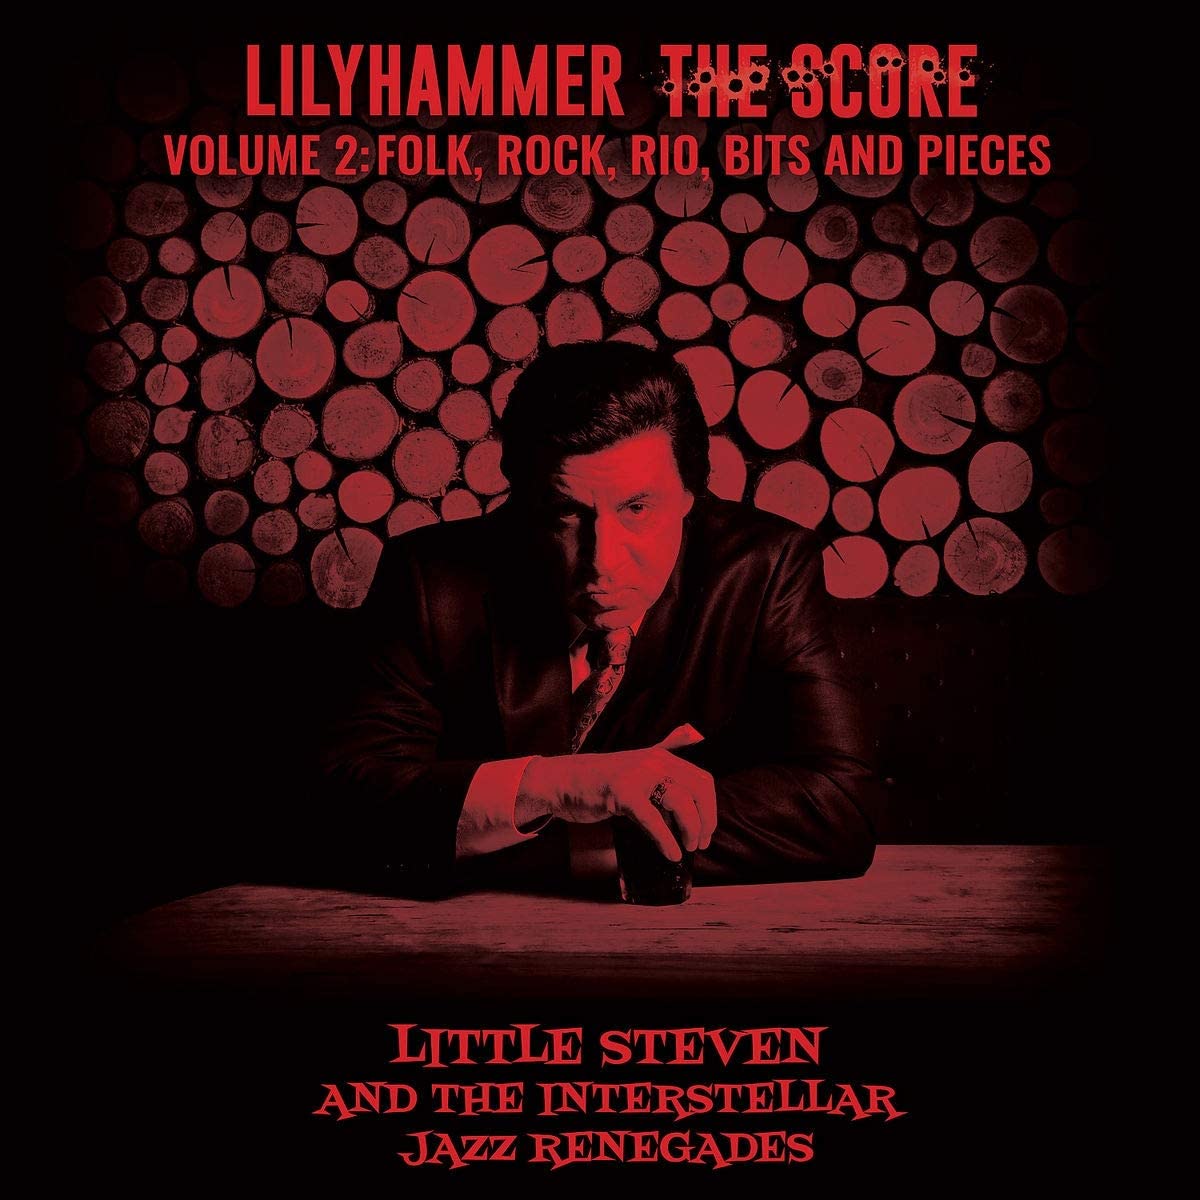 Lilyhammer The Score Volume 2 : Folk, Rock, Rio, Bits And Pieces